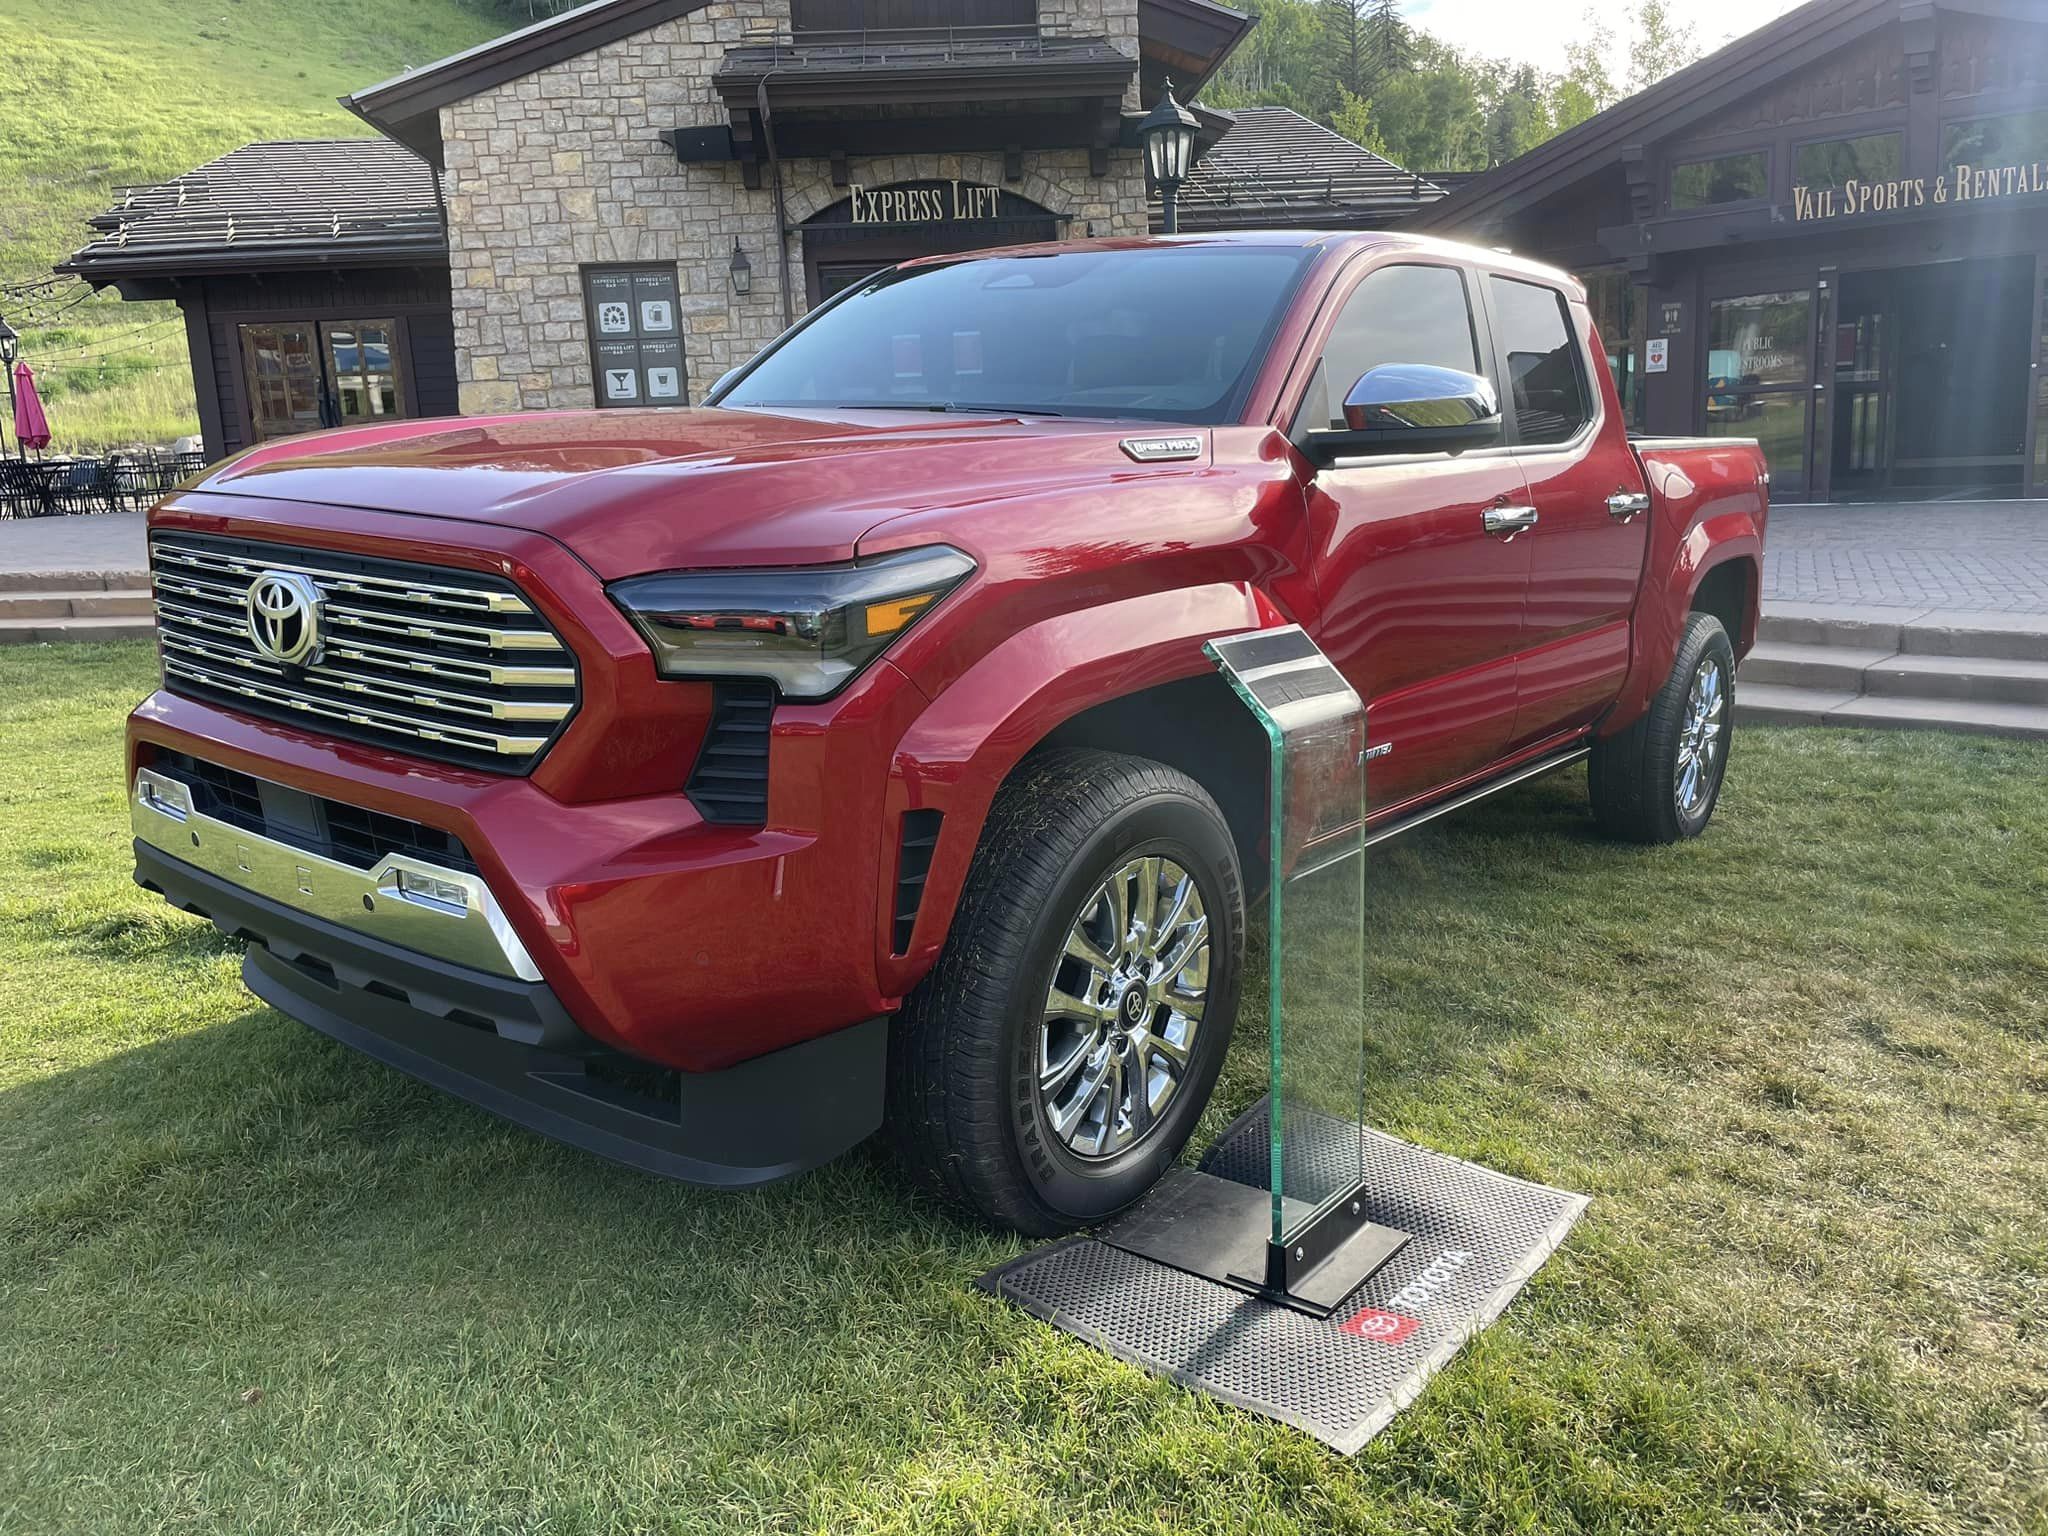 2024 Tacoma 2024 Tacoma Limited in Supersonic Red appears at Toyota Takeover Weekend Vail 2024 Tacoma Limited in Supersonic Red 4